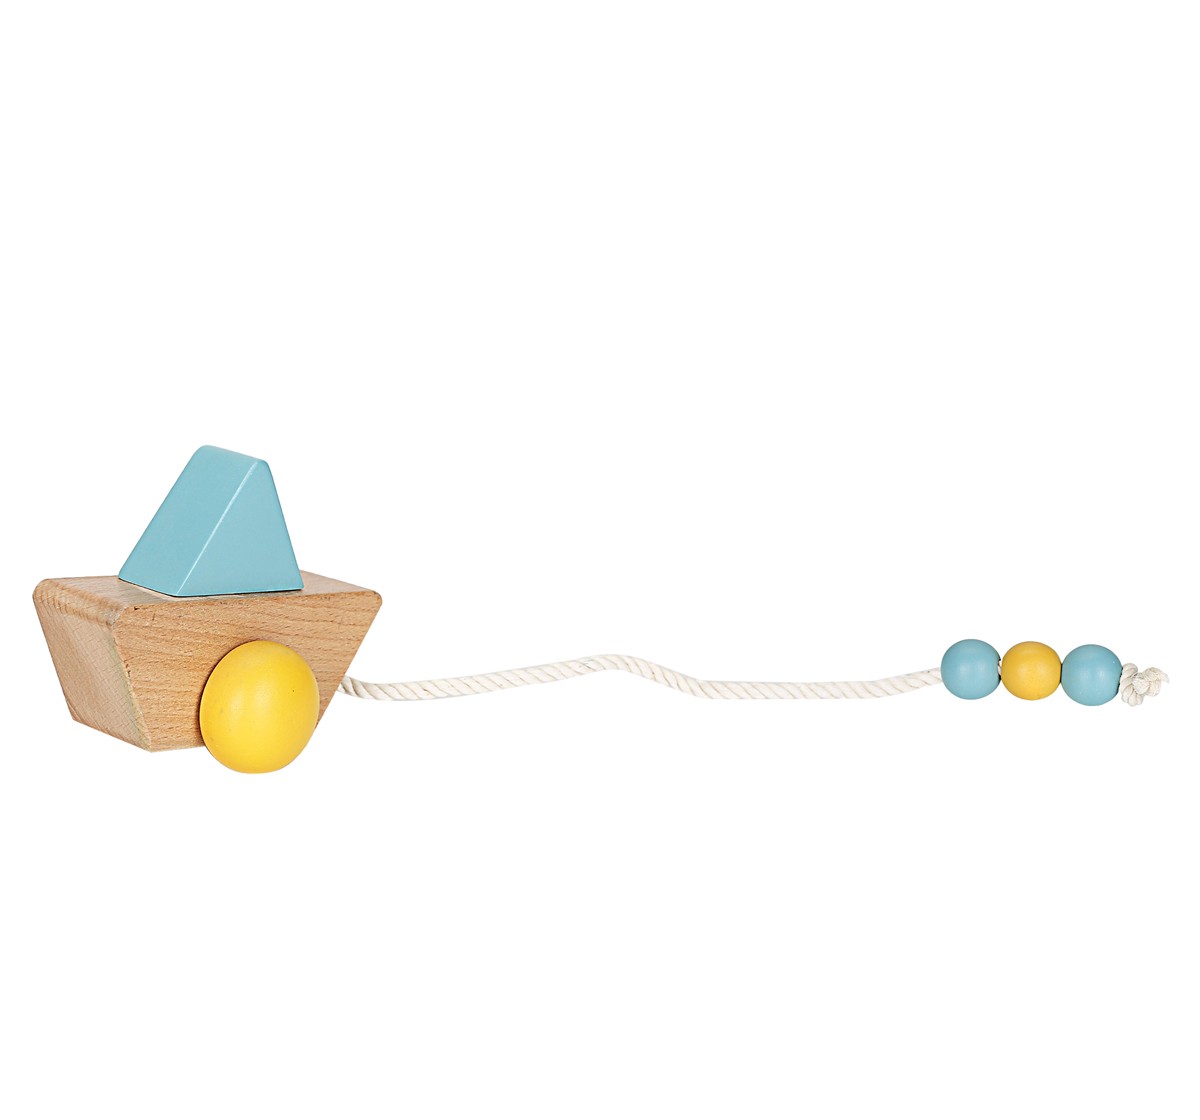 Shooting Star Boat Pull Along Toy for kids 3Y+, Multicolour